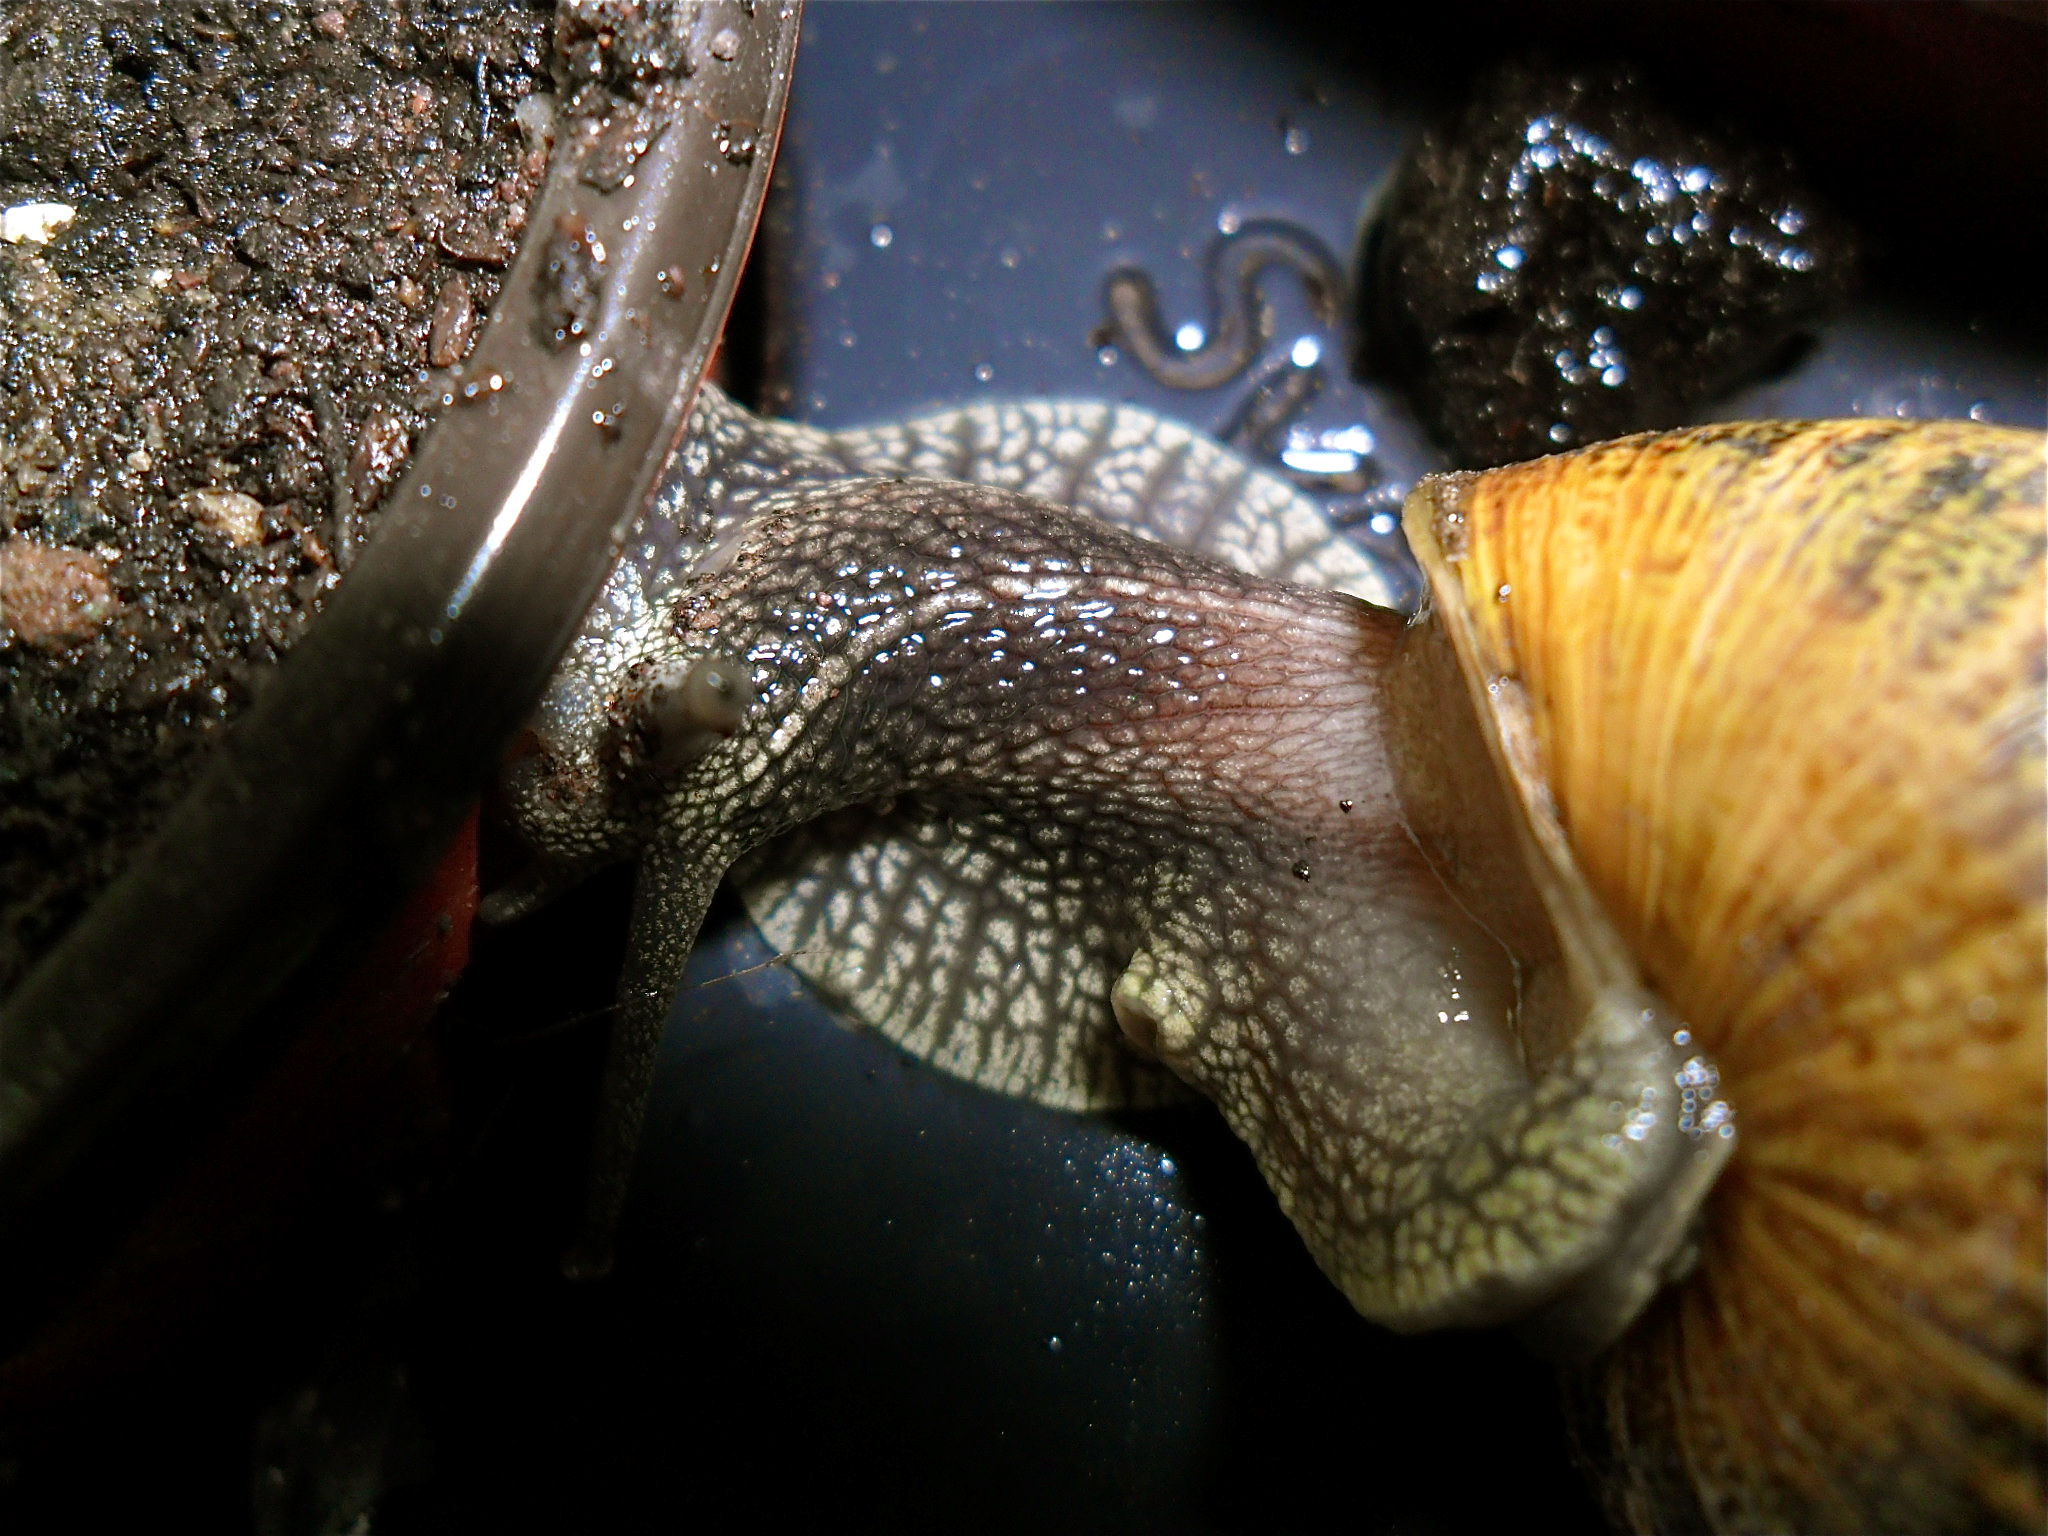 The Snail…Caught At Last…It All Happened So Fast.